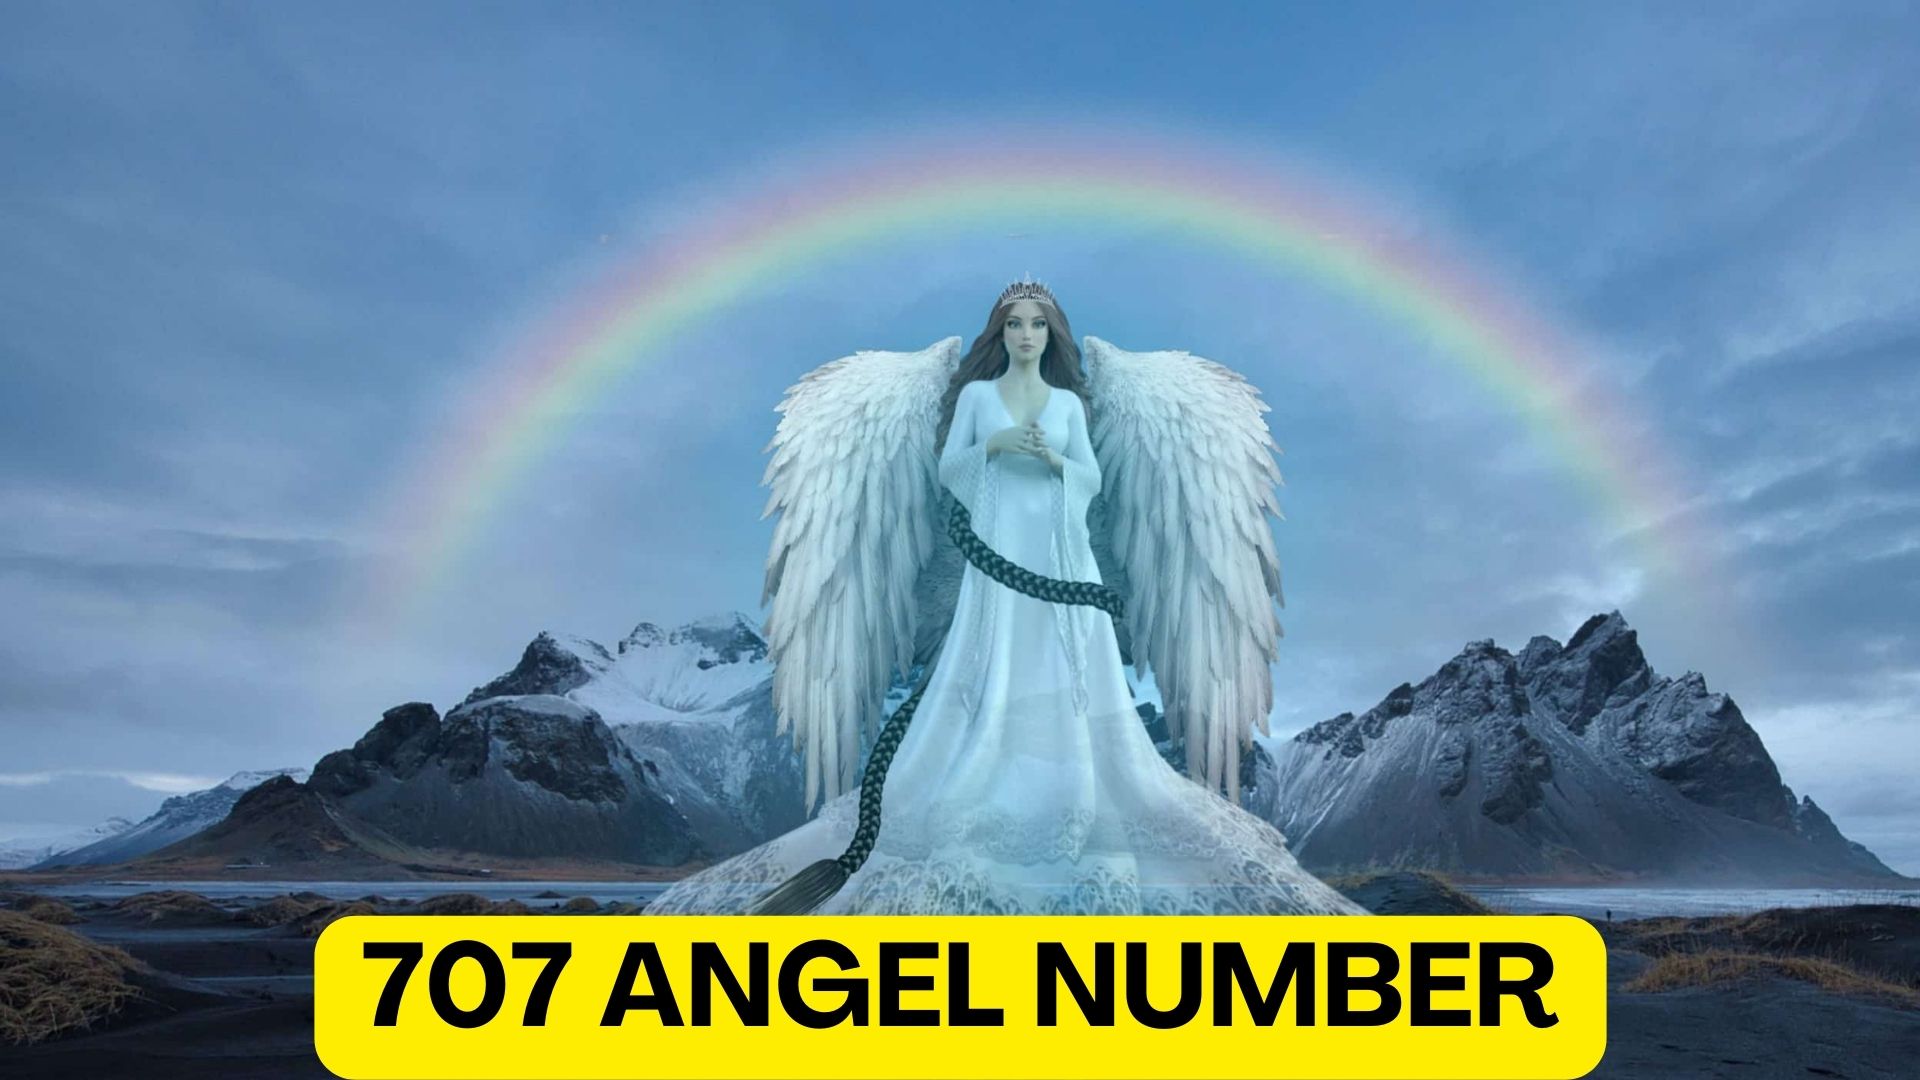 707 Angel Number - Represents A Major Transformation Coming For You